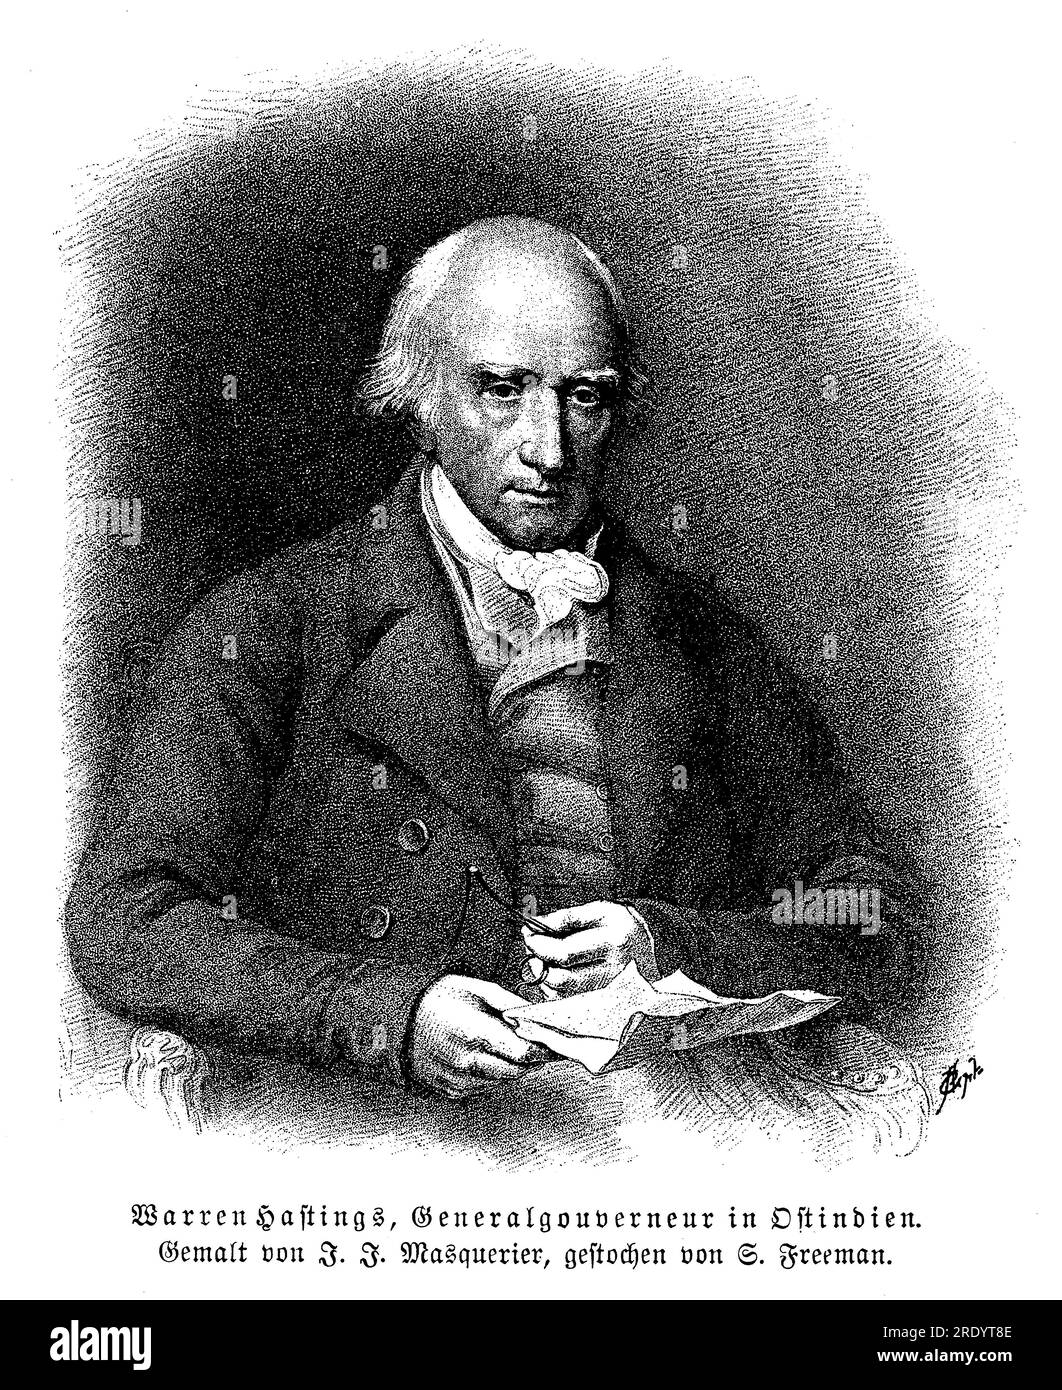 Warren Hastings (1732-1818) was a British colonial administrator who served as the first Governor-General of Bengal from 1772 to 1785. He played a crucial role in the early administration of British India. Under his leadership, Hastings sought to stabilize and reform the East India Company's rule in Bengal Stock Photo